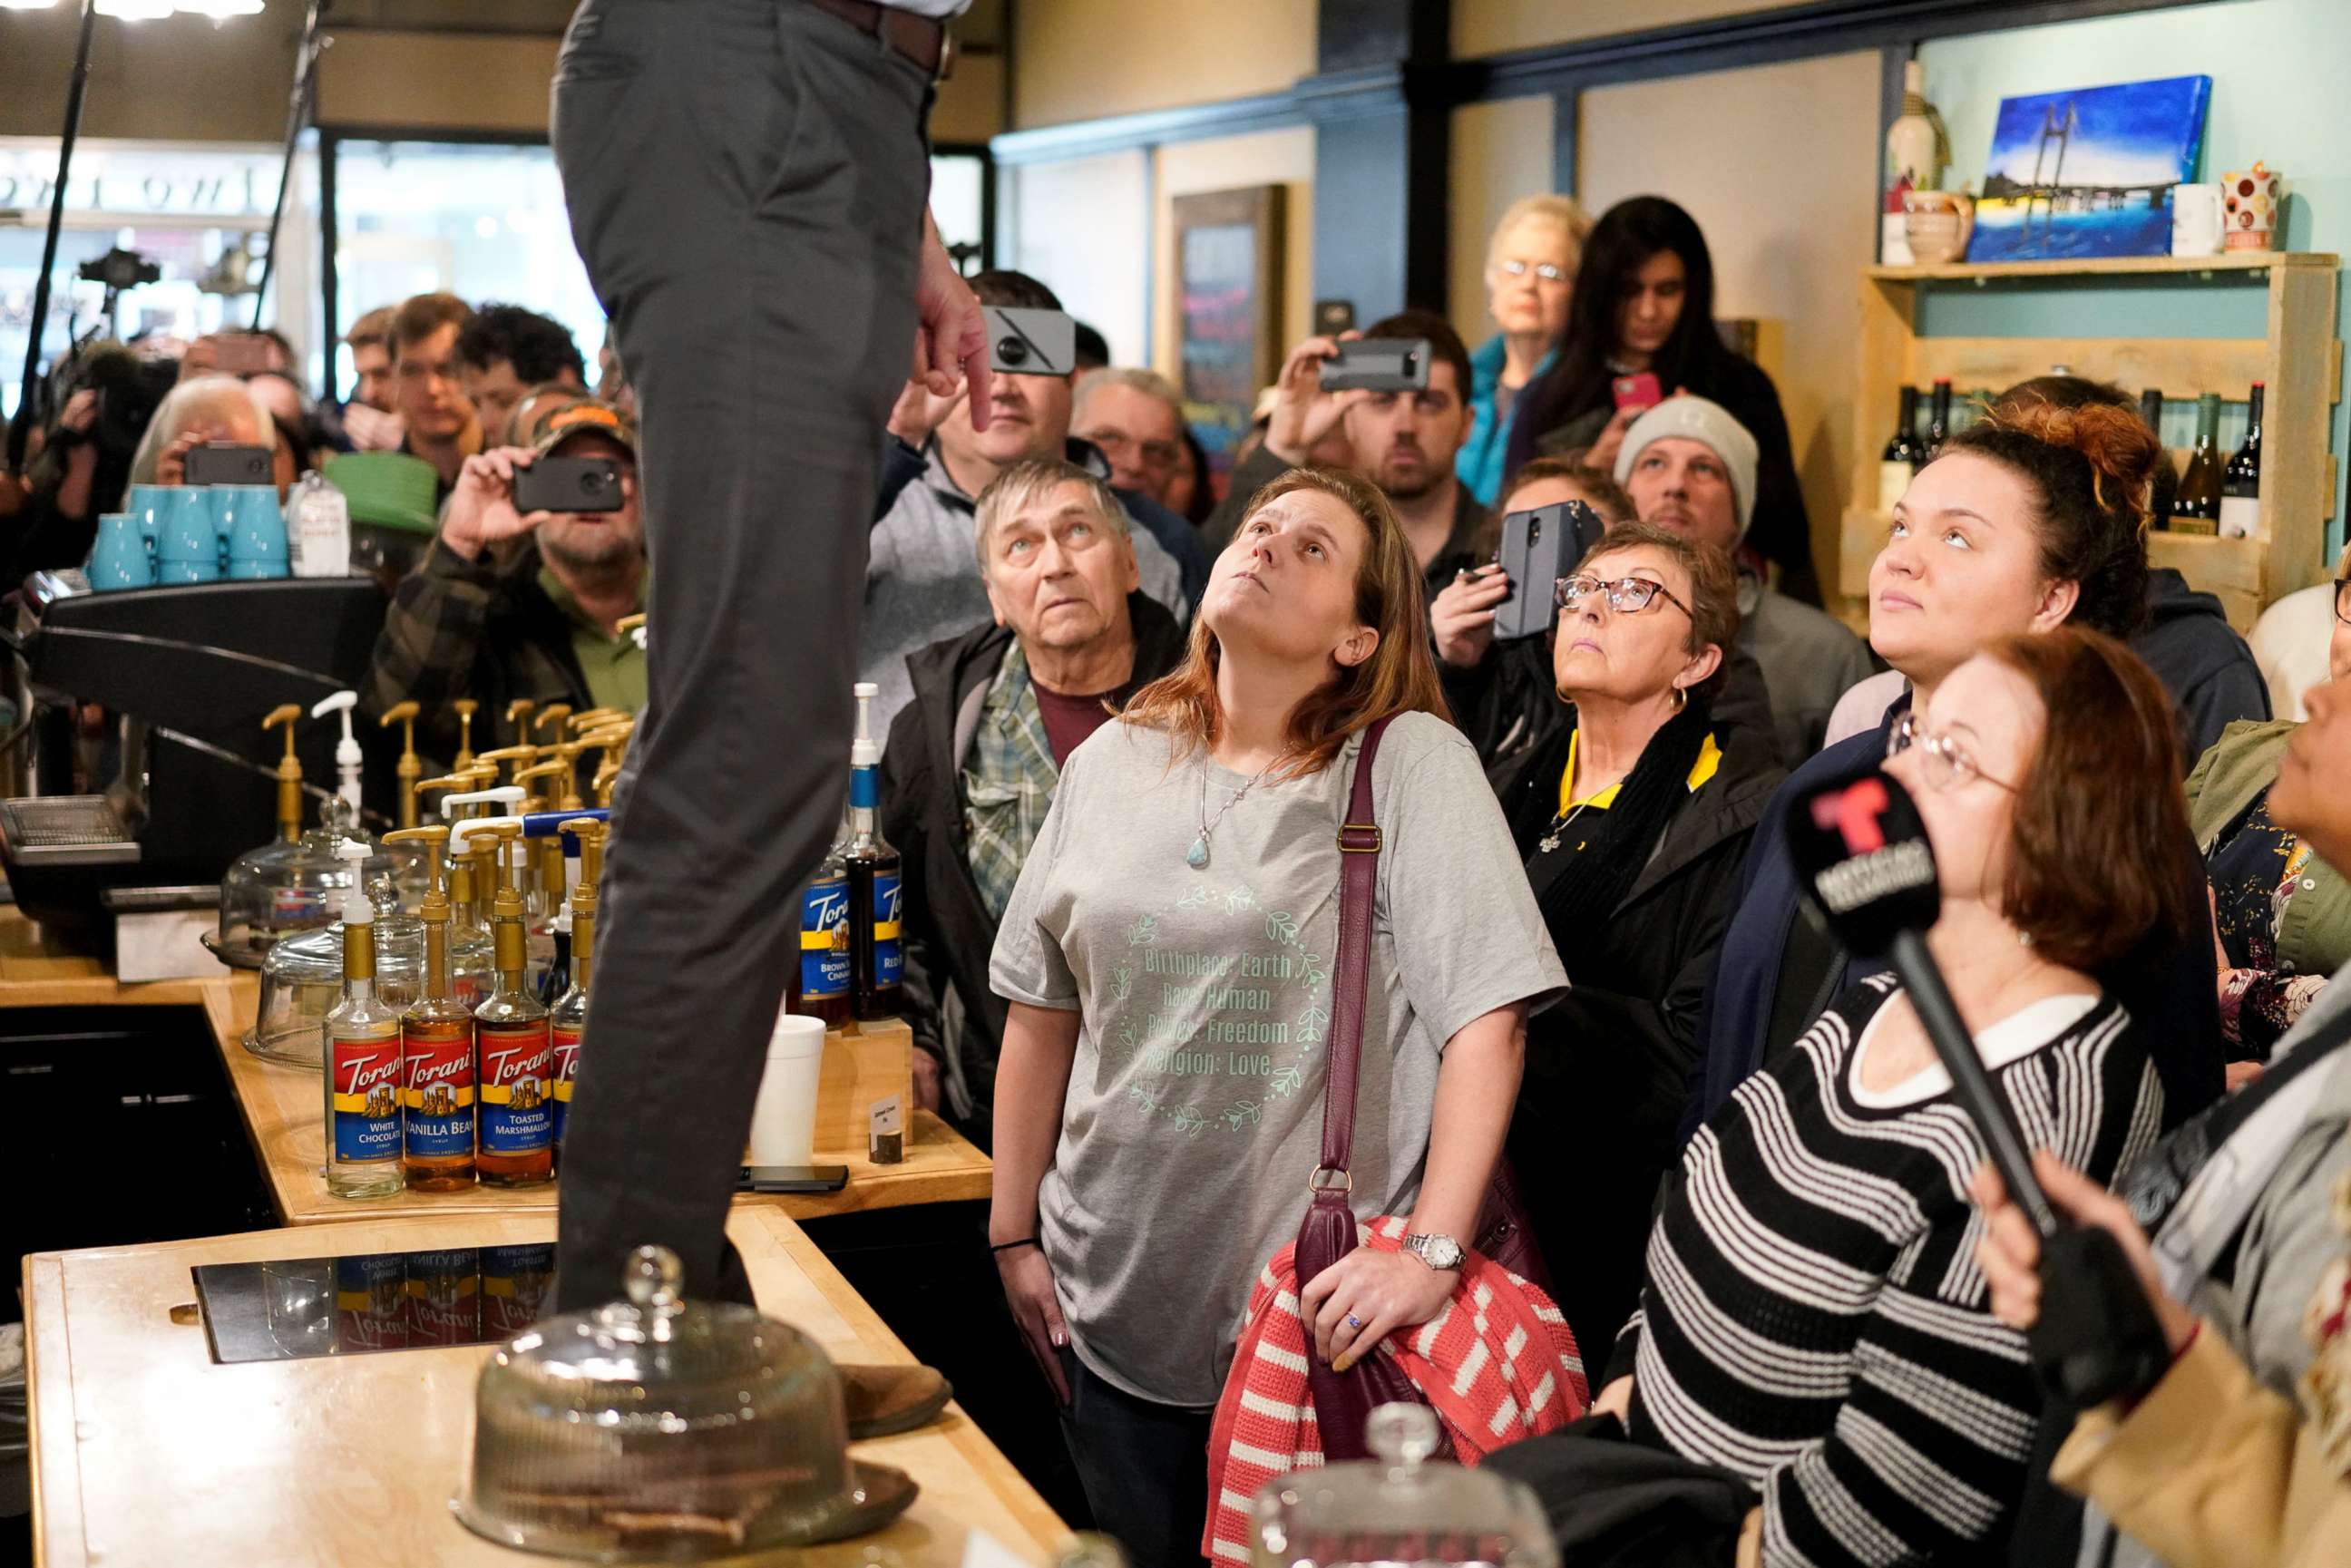 PHOTO: Attendees listen as Democratic 2020 presidential candidate Beto O'Rourke, standing on counter, speaks during a campaign stop at a coffee house in Burlington, Iowa, March 14, 2019.